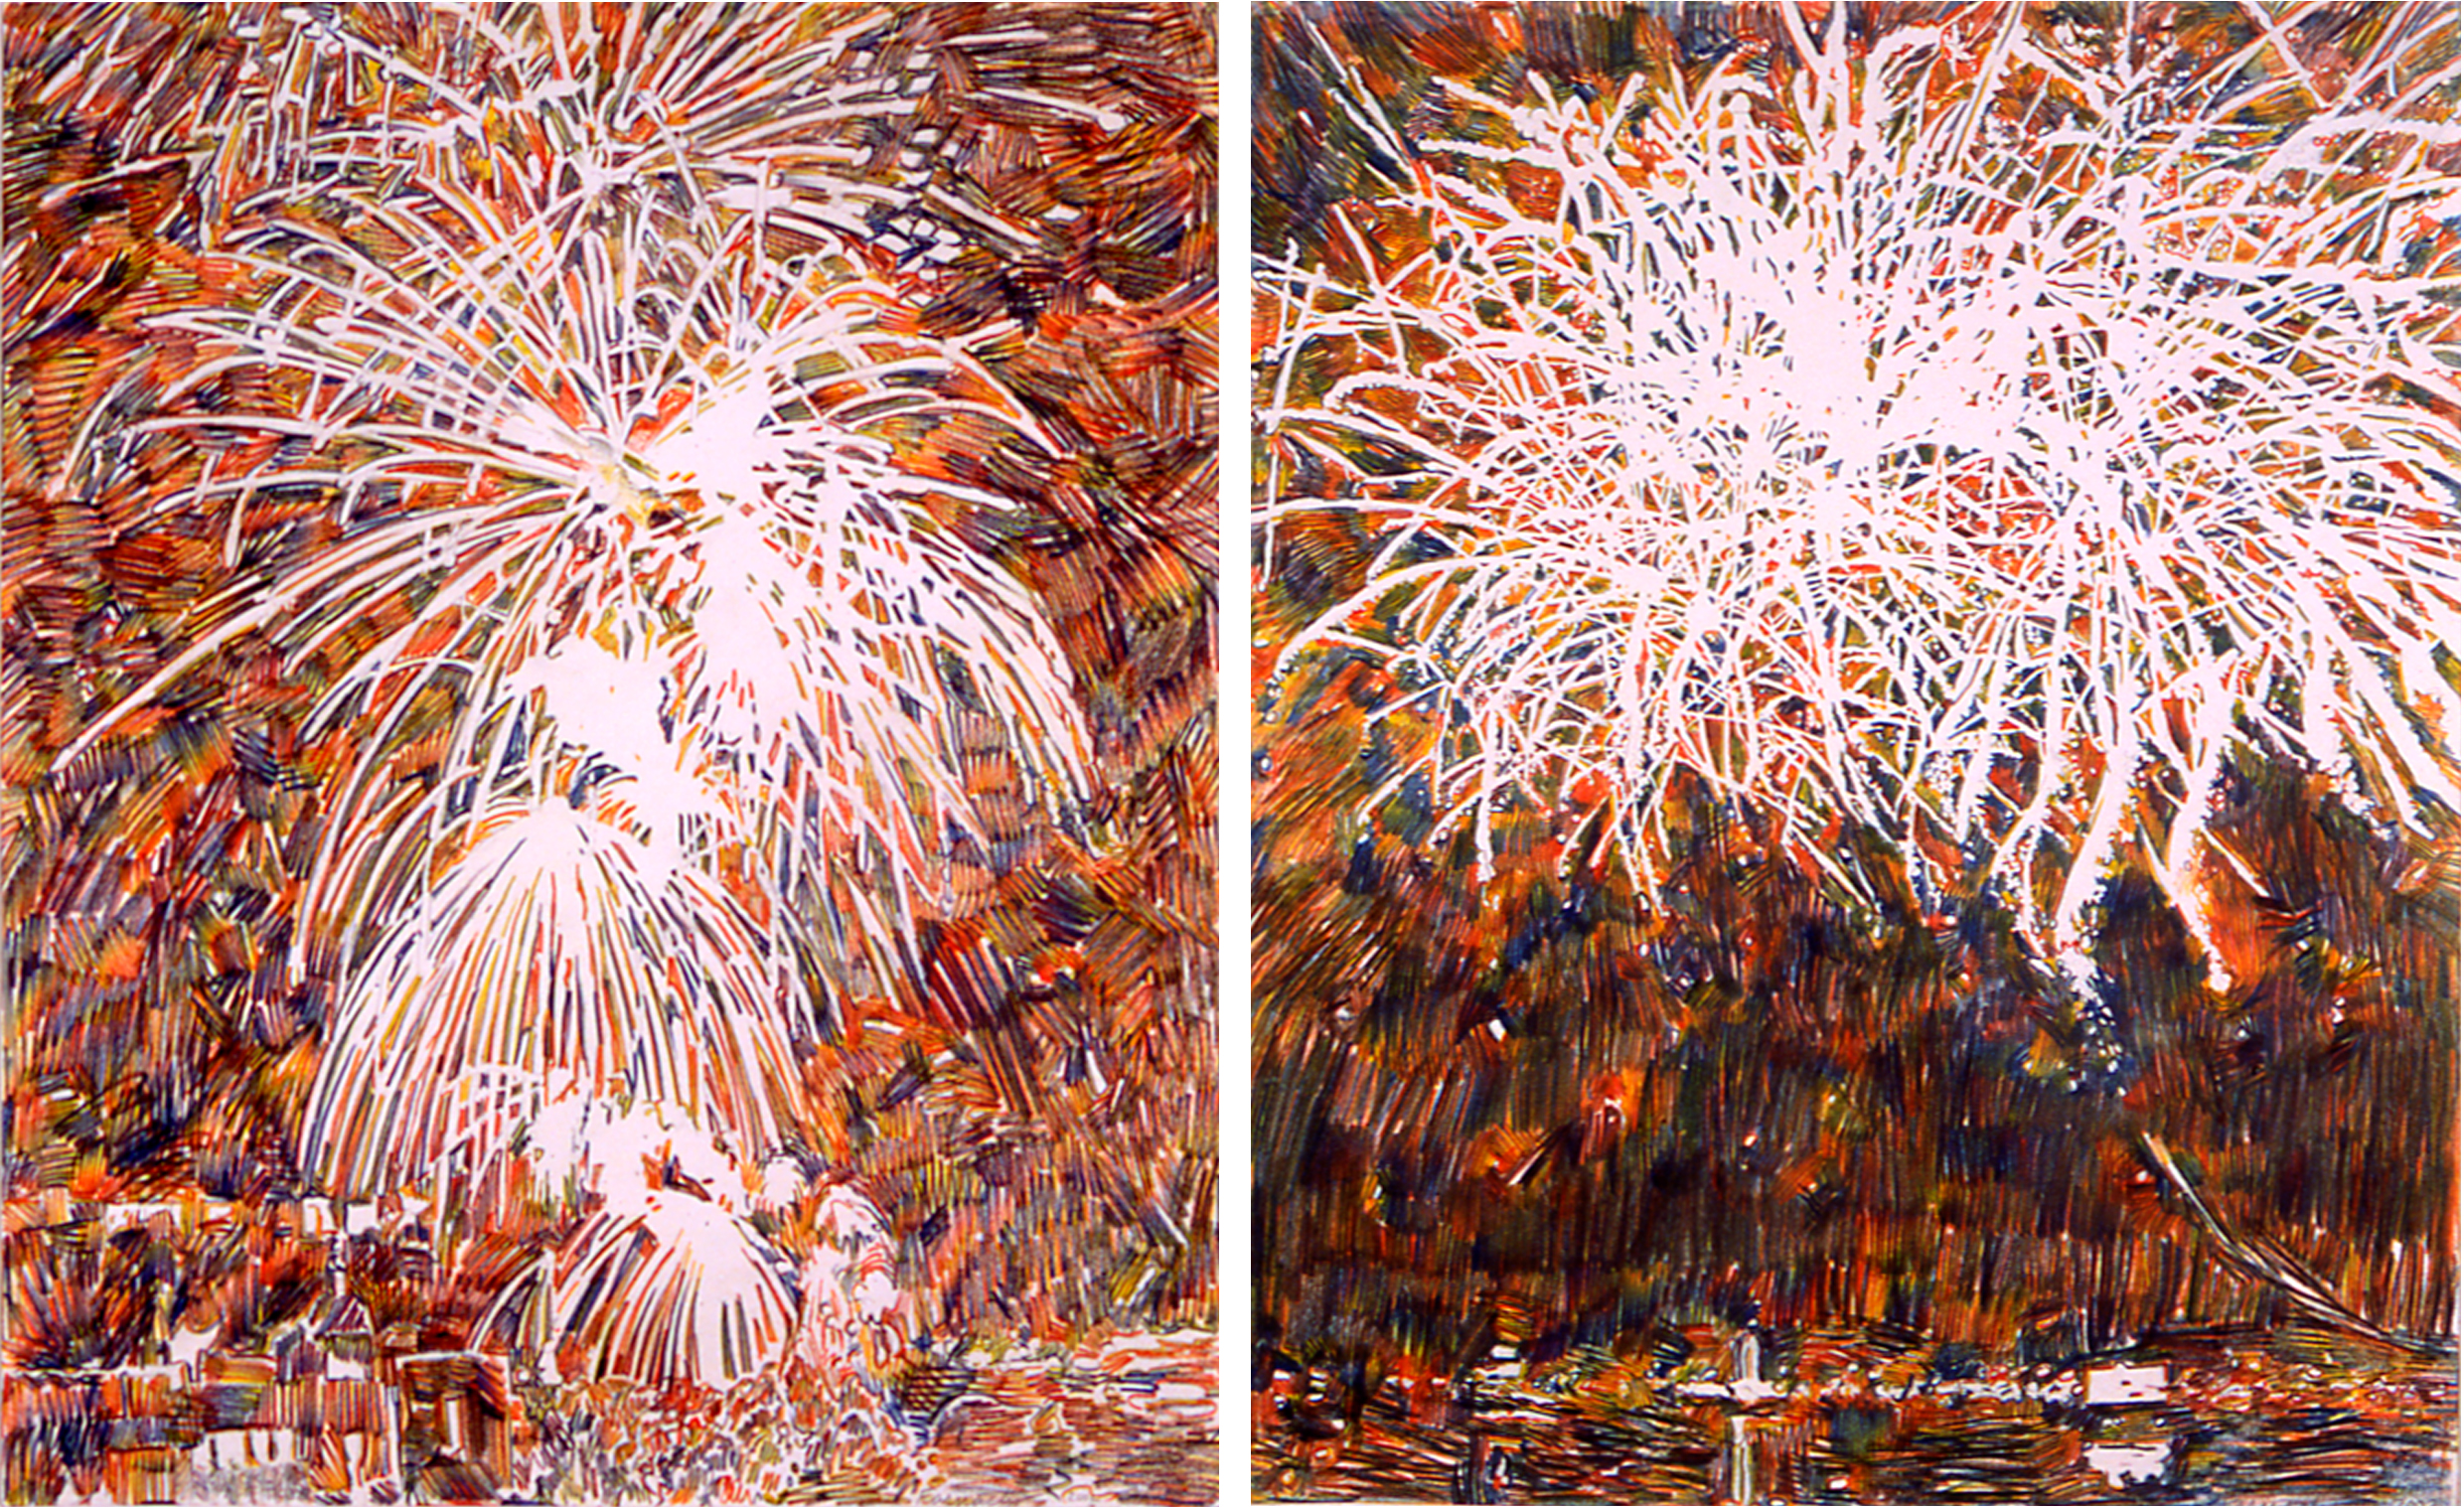 Fireworks III, 2002, Quattro Colored Pencil on Paper, 17 1/2 x 14 inches